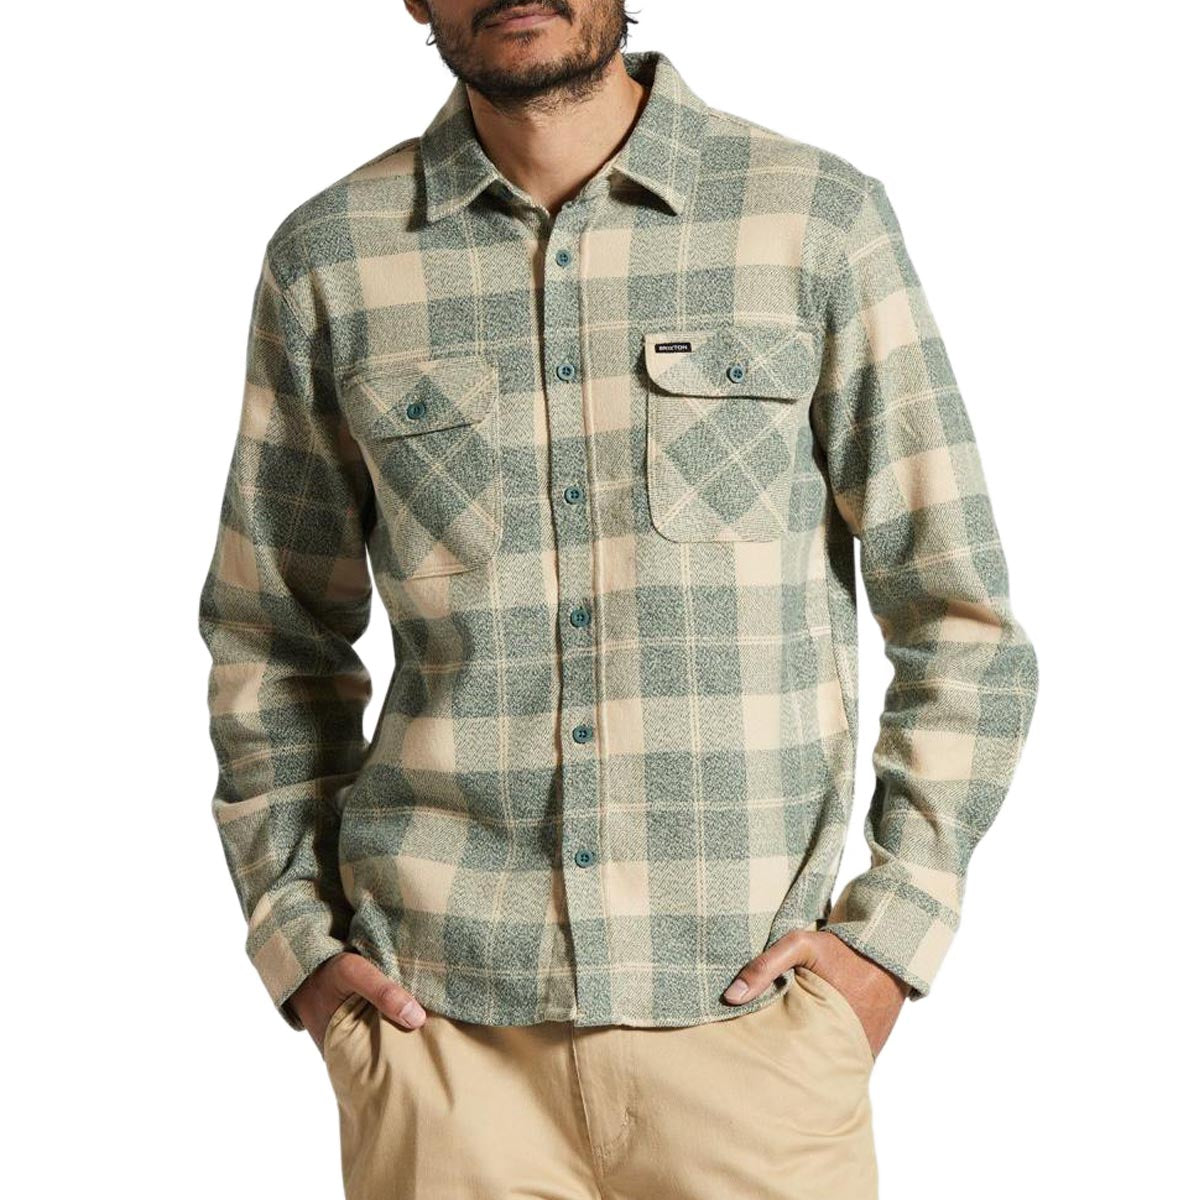 Brixton Bowery Stretch Water Resistant Flannel Shirt - Trekking Green/Oatmilk image 1